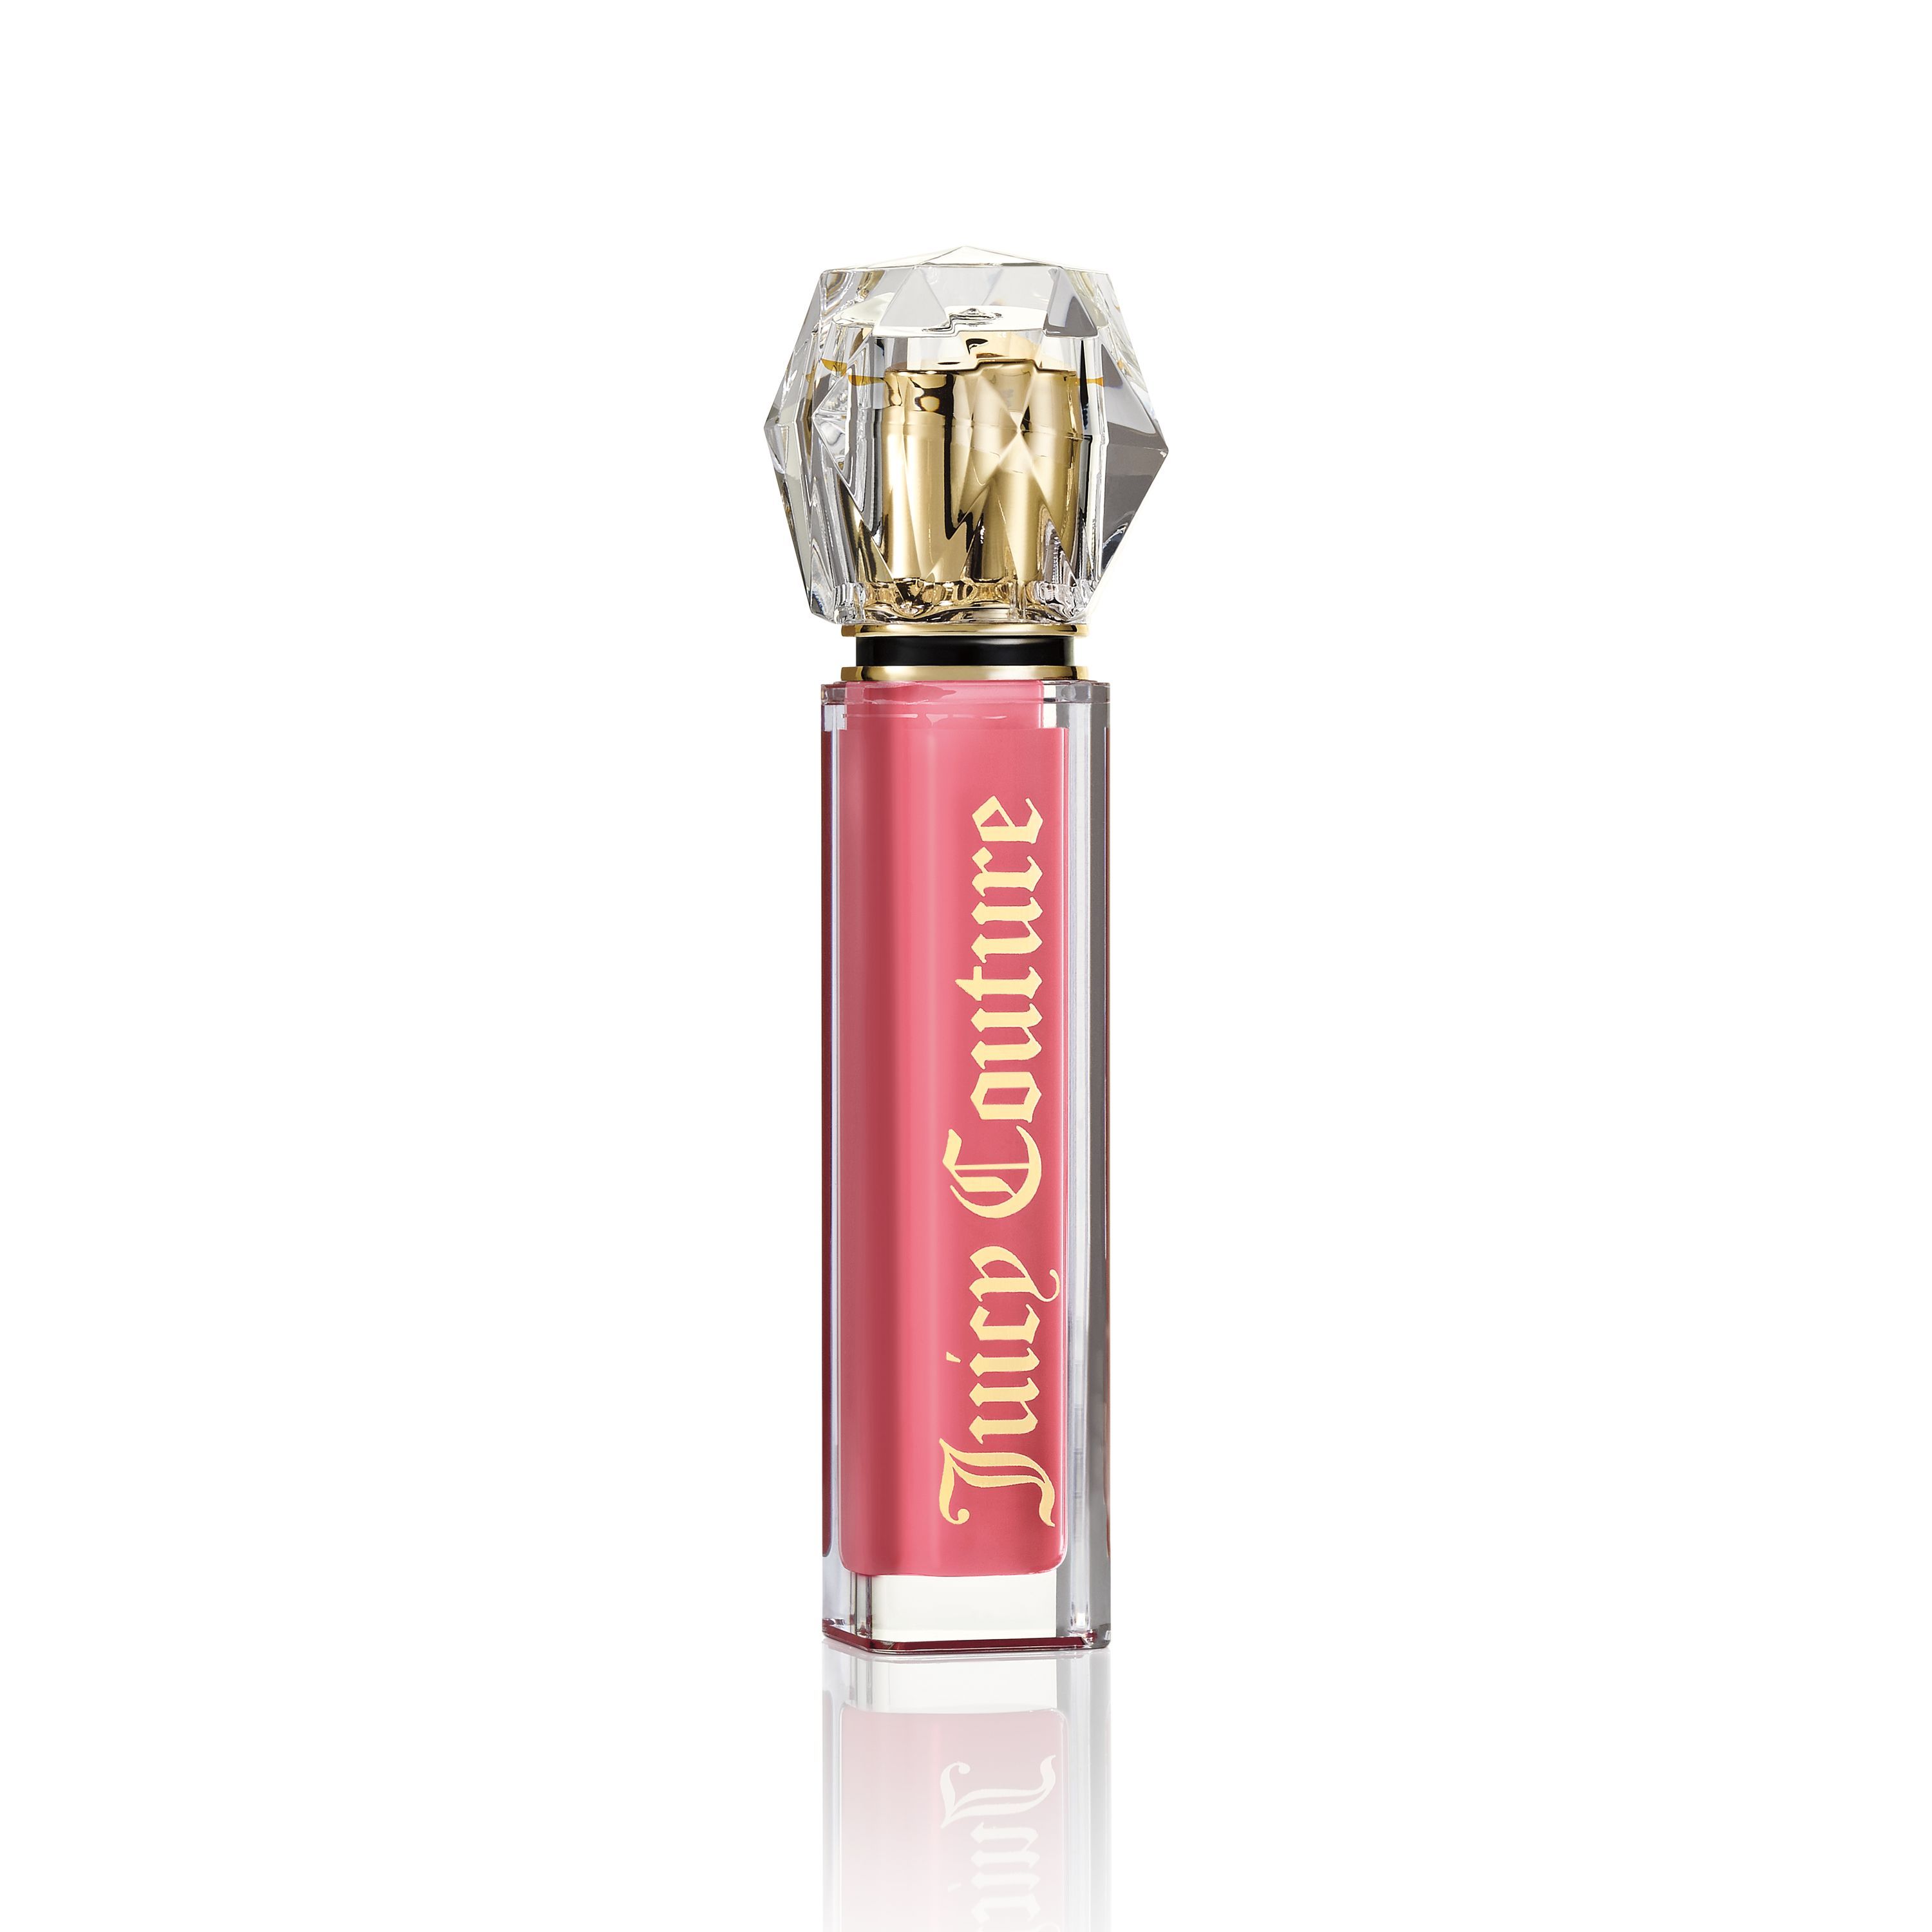 Juicy Couture is Launching a Makeup Line - Juicy Couture New Lipstick,  Eyeshadow, Lip Gloss, Eyeliner